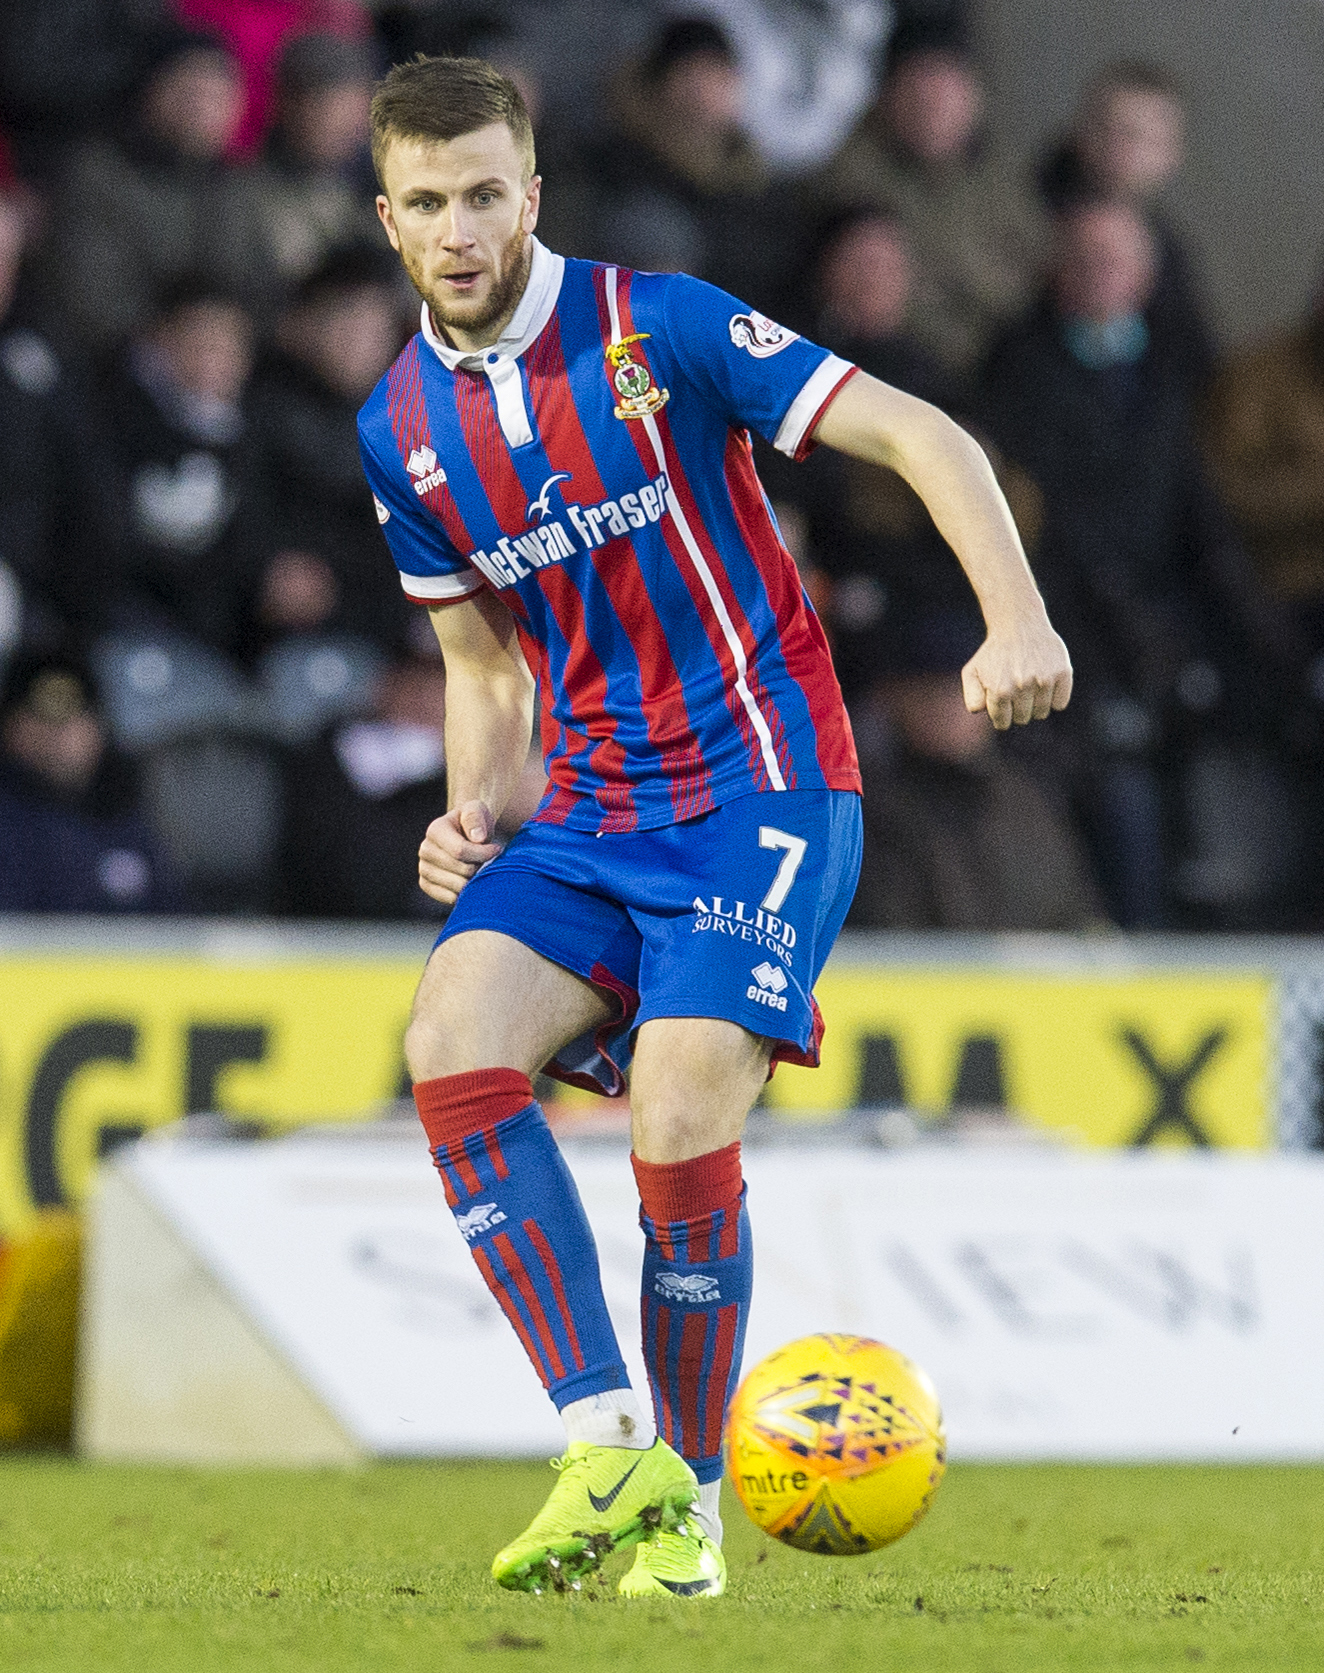 Liam Polworth missed a first-half penalty for Caley Thistle.